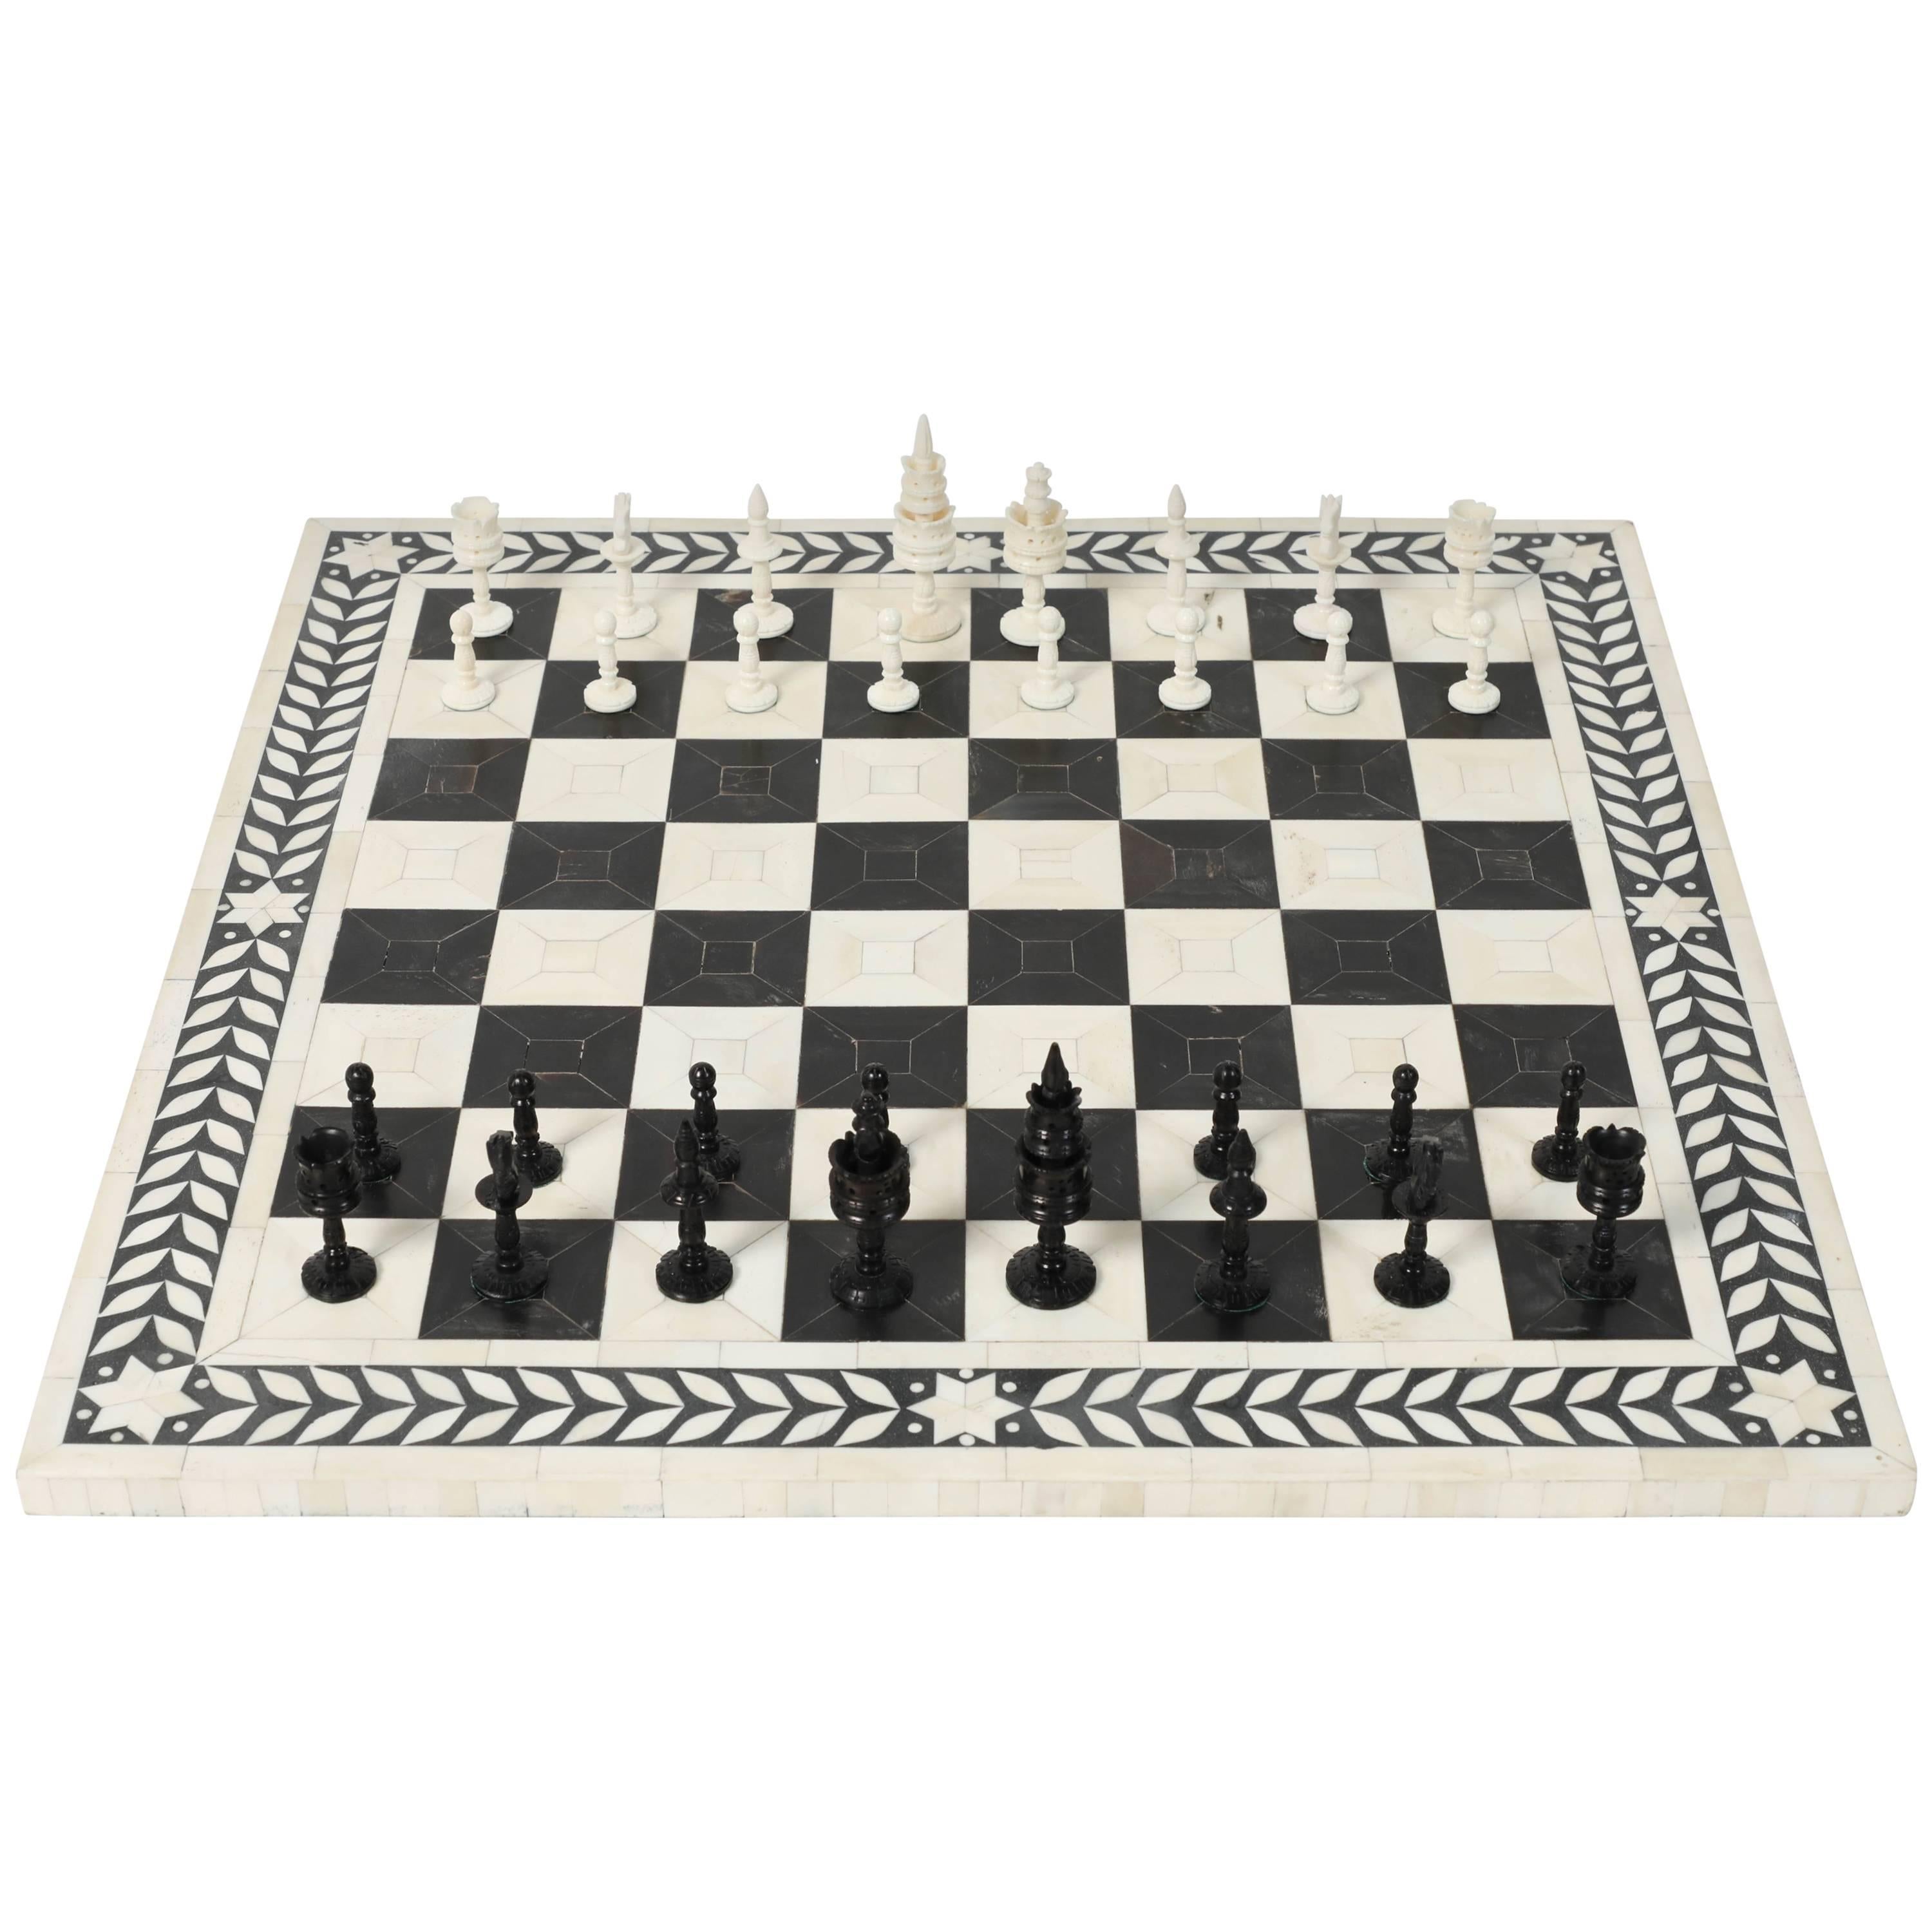 Large Vizagapatam Chess Set with Elaborately Hand-Carved Bone Chess Pieces